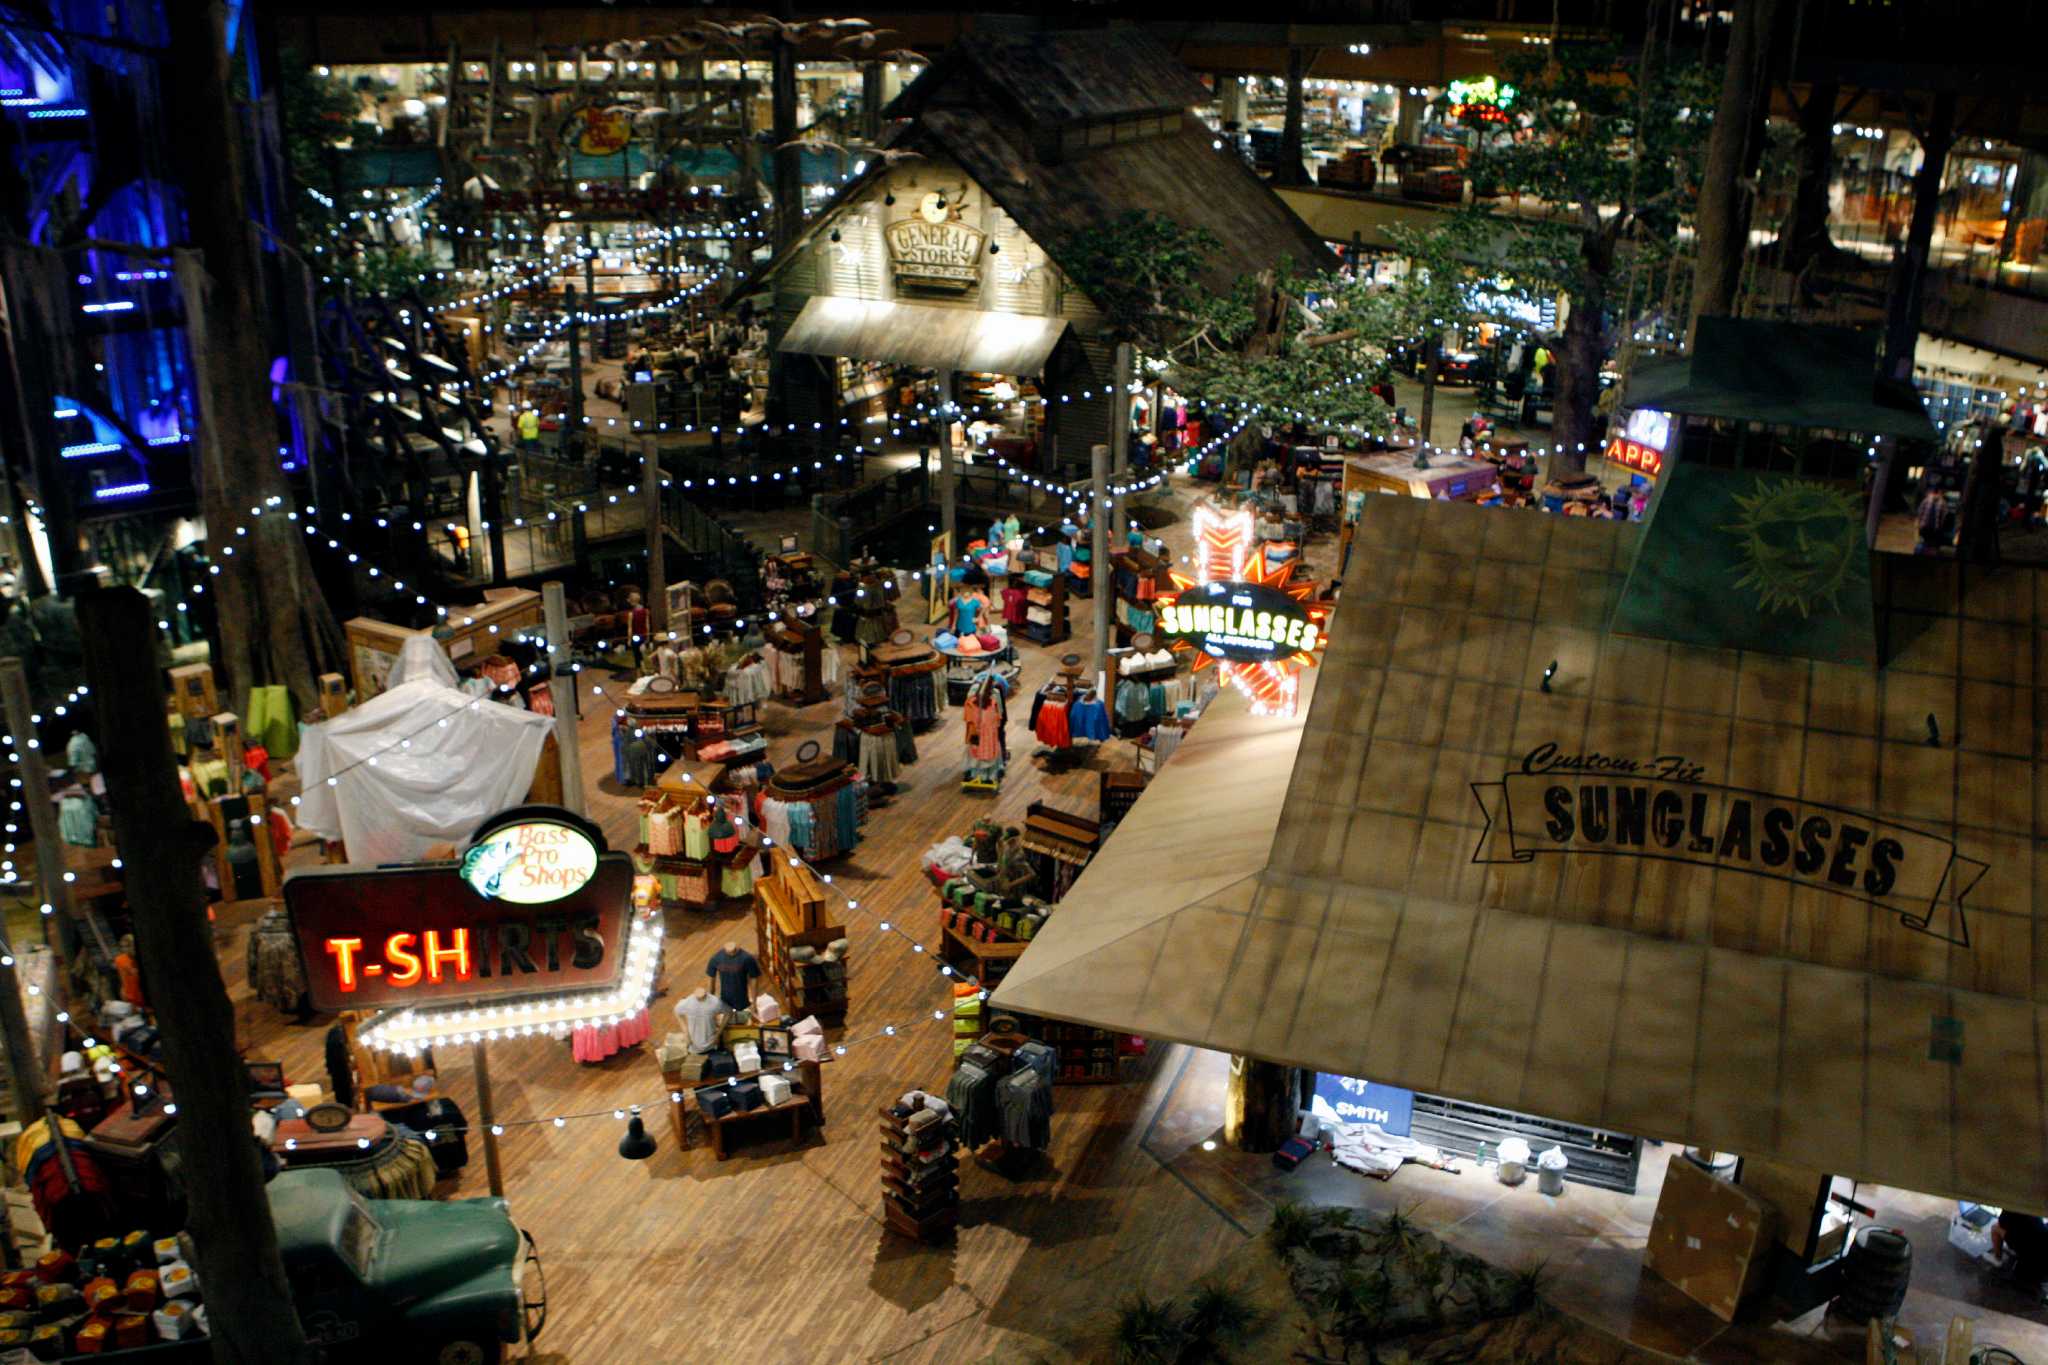 New Bass Pro Shops in Memphis includes hotel